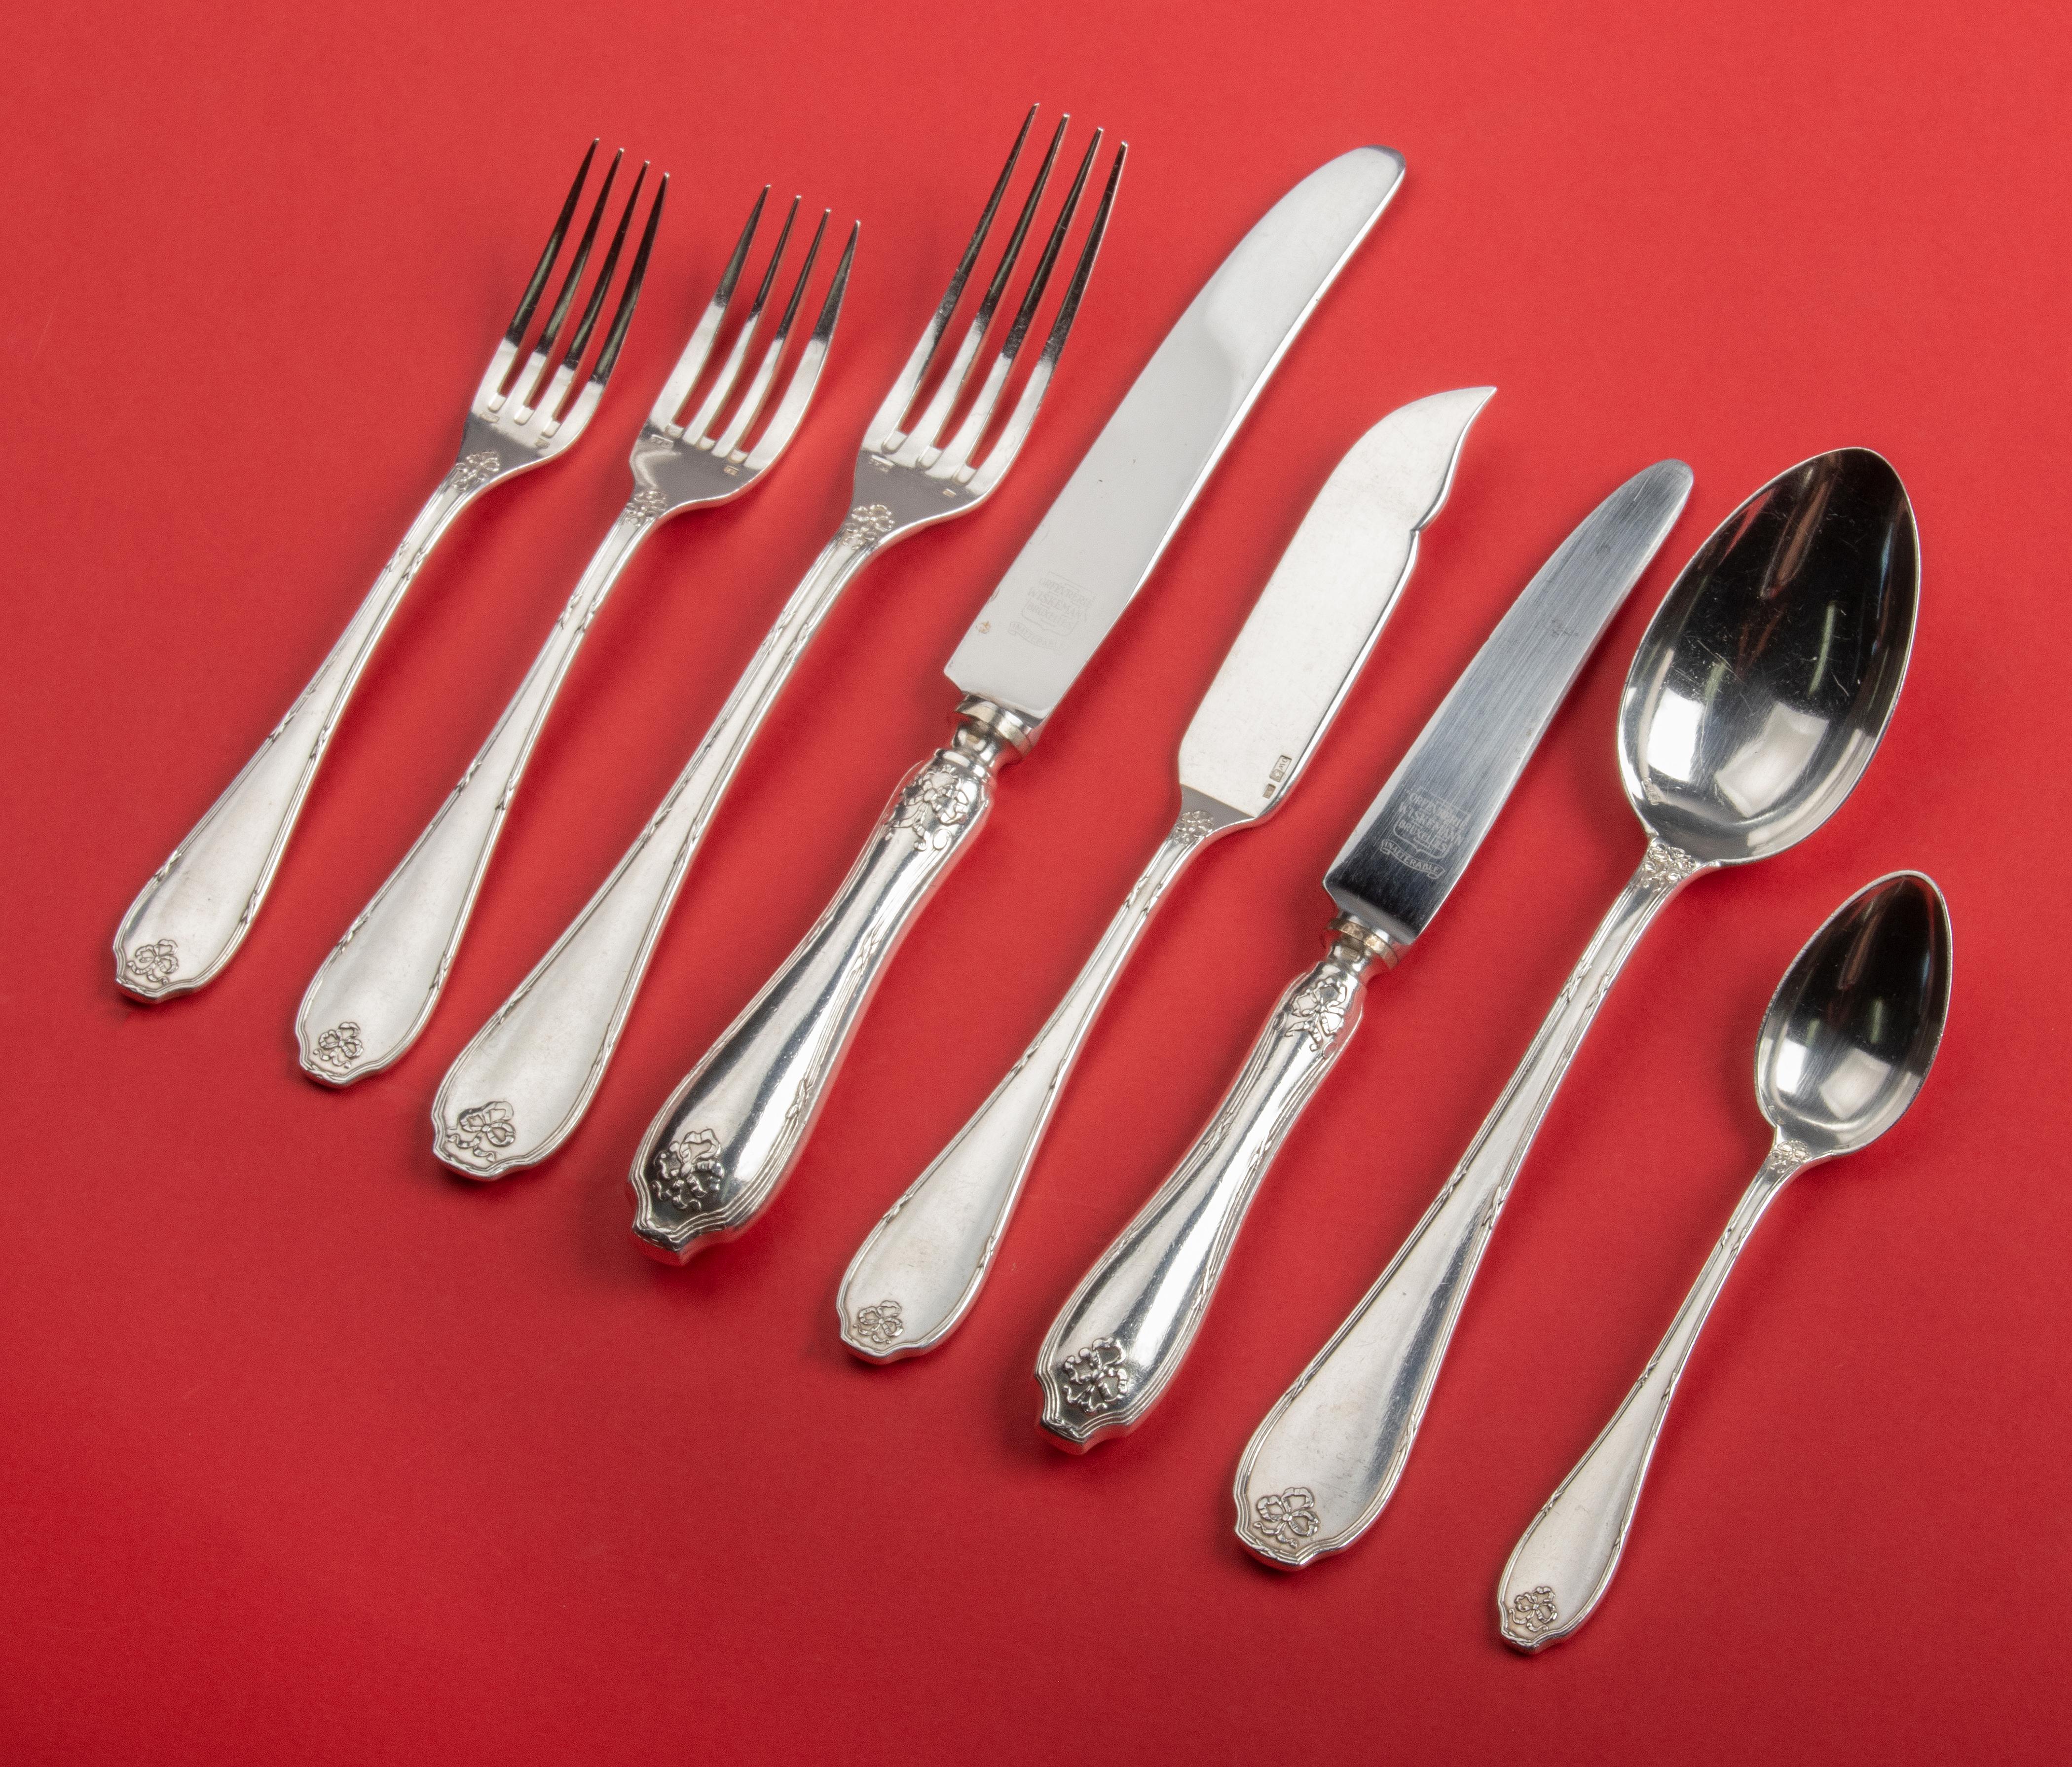 96-Piece silver-plated flatware for 12 people by the Belgian maker Wiskemann. The flatware has refined decorations with ribbons and bows. The set is composed as follows: 12 table knives, 12 table forks, 12 table spoons, 12 lunch knives, 12 lunch